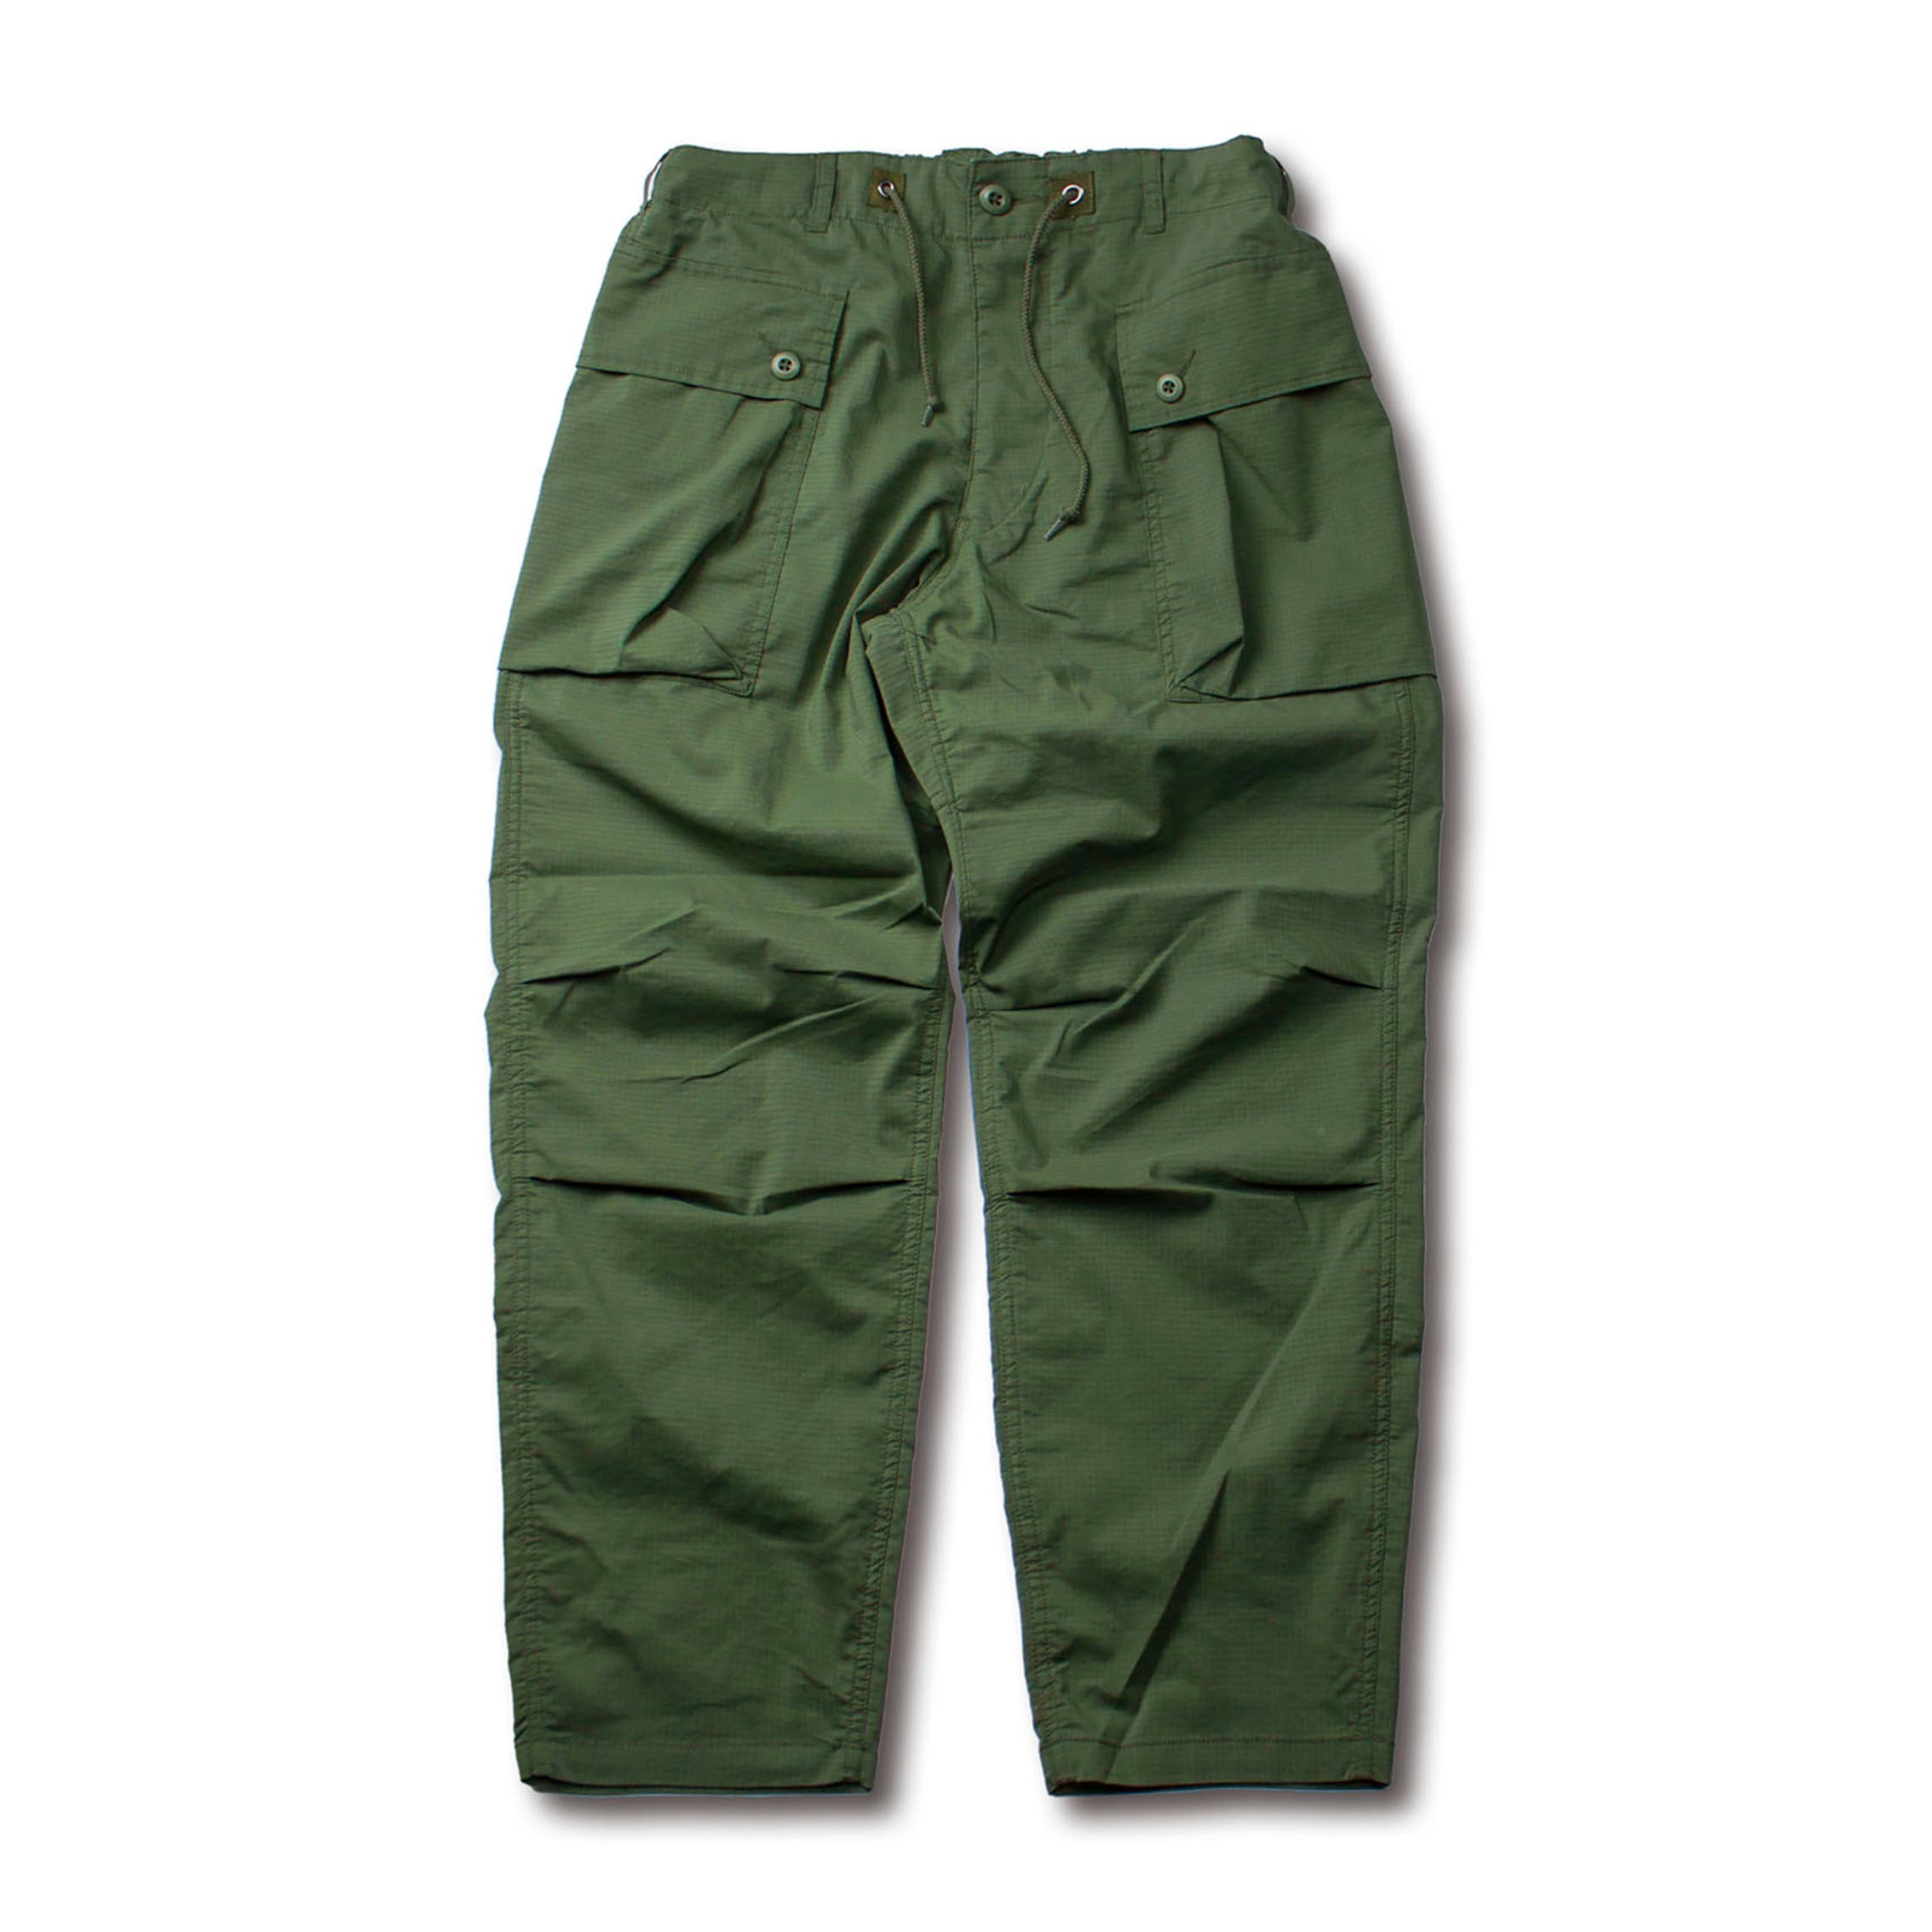 COOLMAX RIP STOP 9/10 MILITARY PANTS – UNFRM OUTDOOR STANDARD